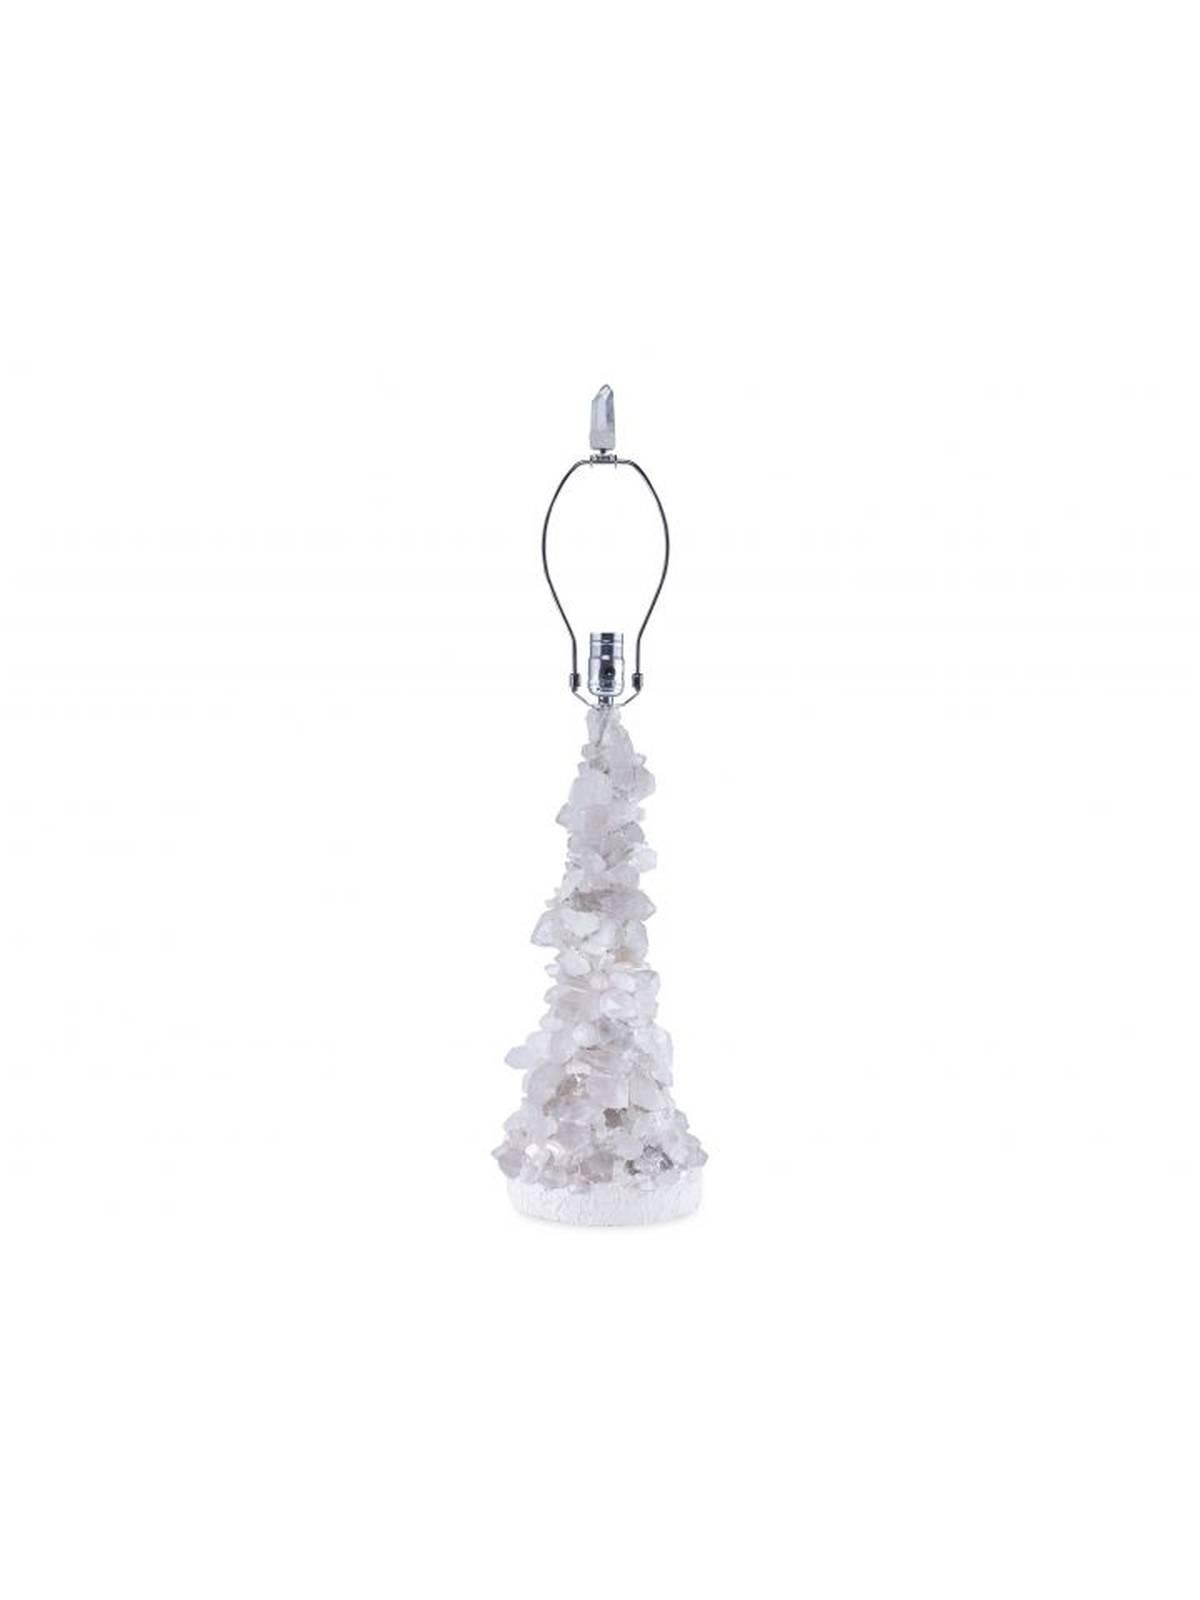 Brutalist-inspired lamp of white and clear quartz crystal. Constructed of various sized crystals embedded into a mortar base, handmade by artisans in the USA. Finished with a silk shade and single polished quartz finial. Limited quantities